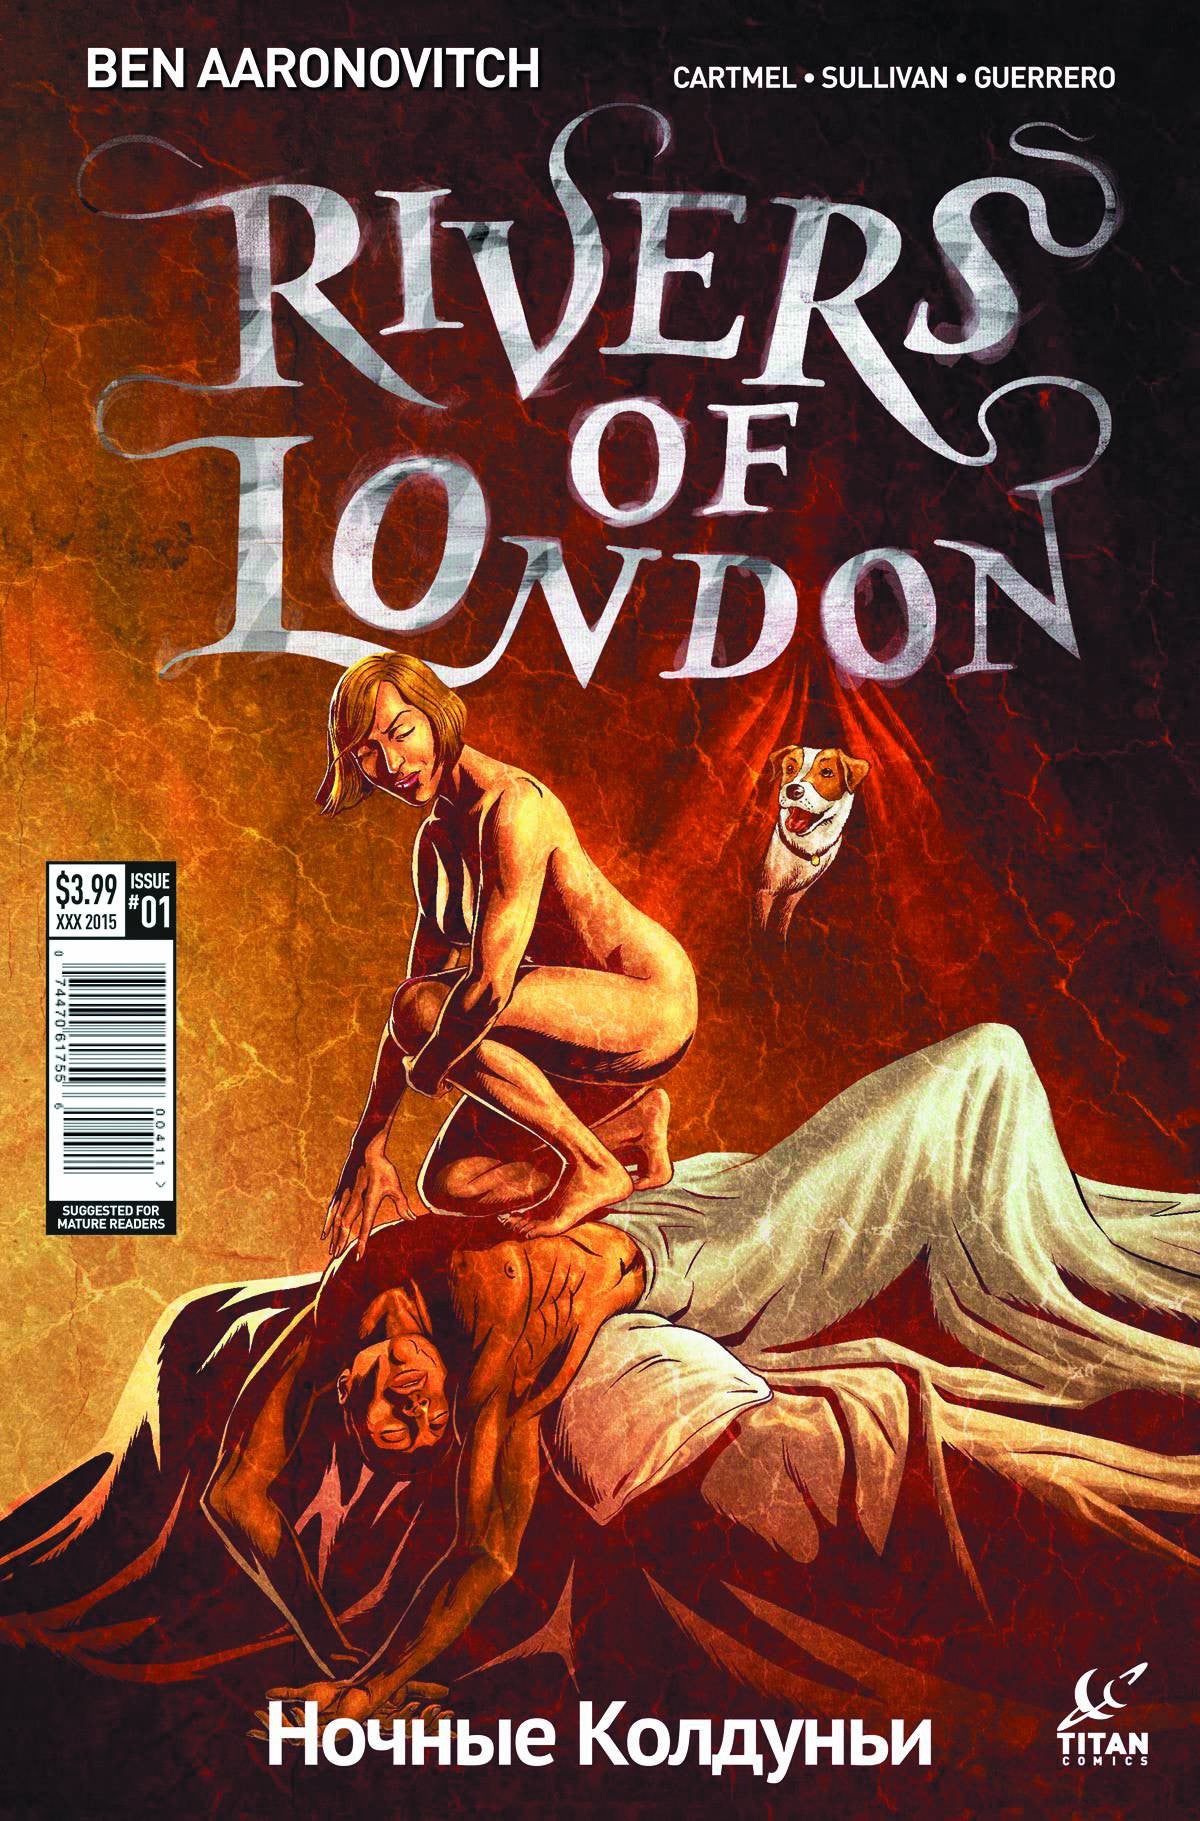 RIVERS OF LONDON NIGHT WITCH #1 (OF 5) CVR C SULLIVAN (MR) COVER